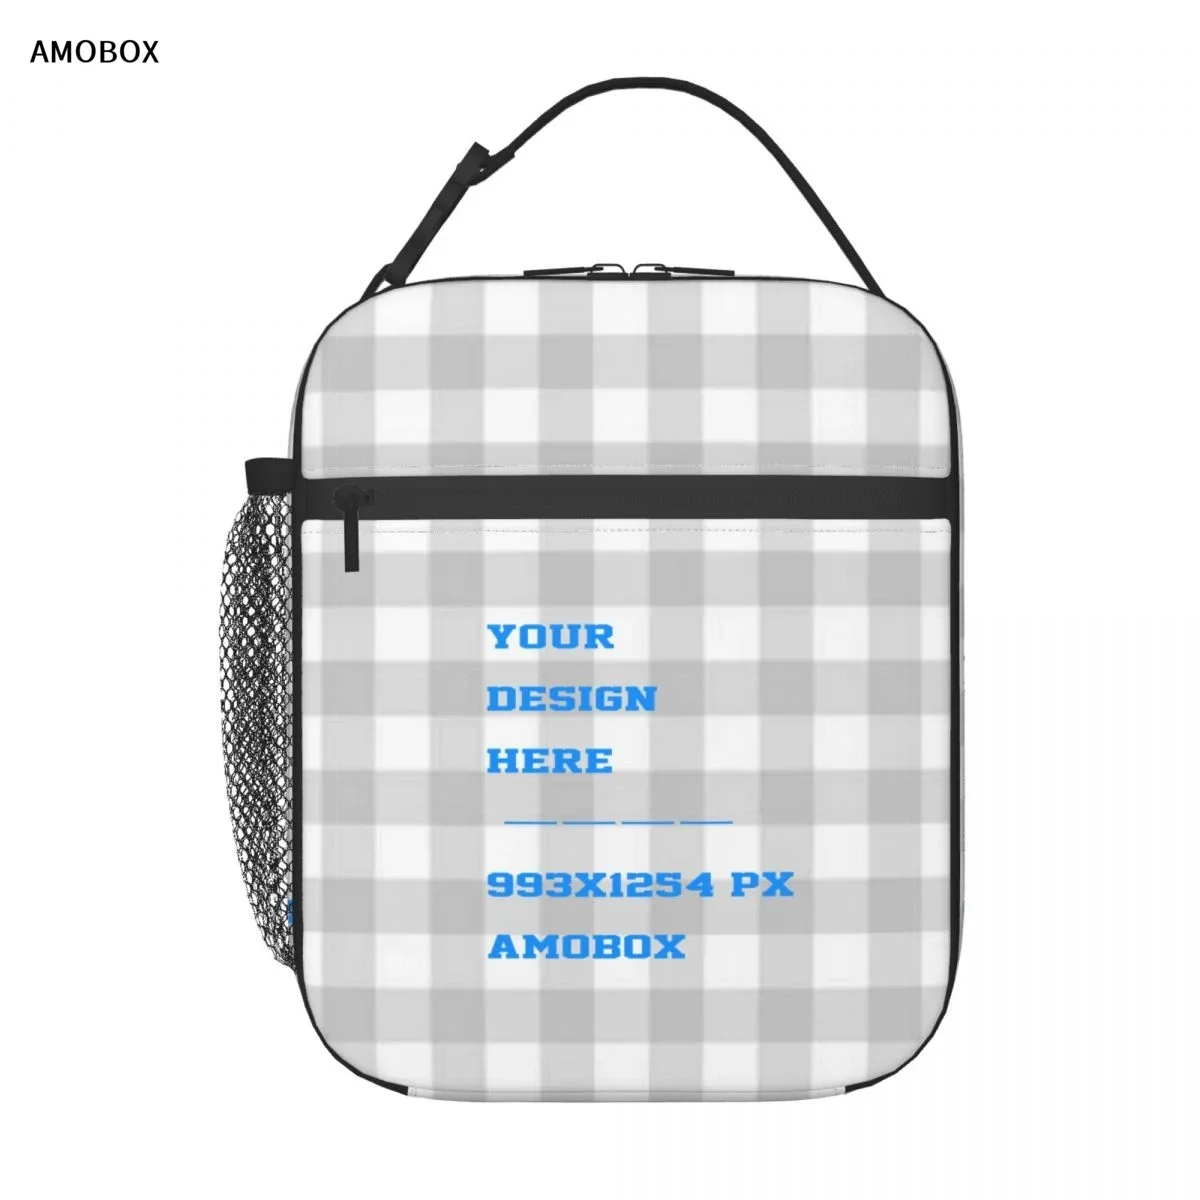 

AMOBOX Customizable Insulated Lunch Bag, Reusable with Handles, Carry On Food Cooler Tote Bags for School Picnic Hiking Work